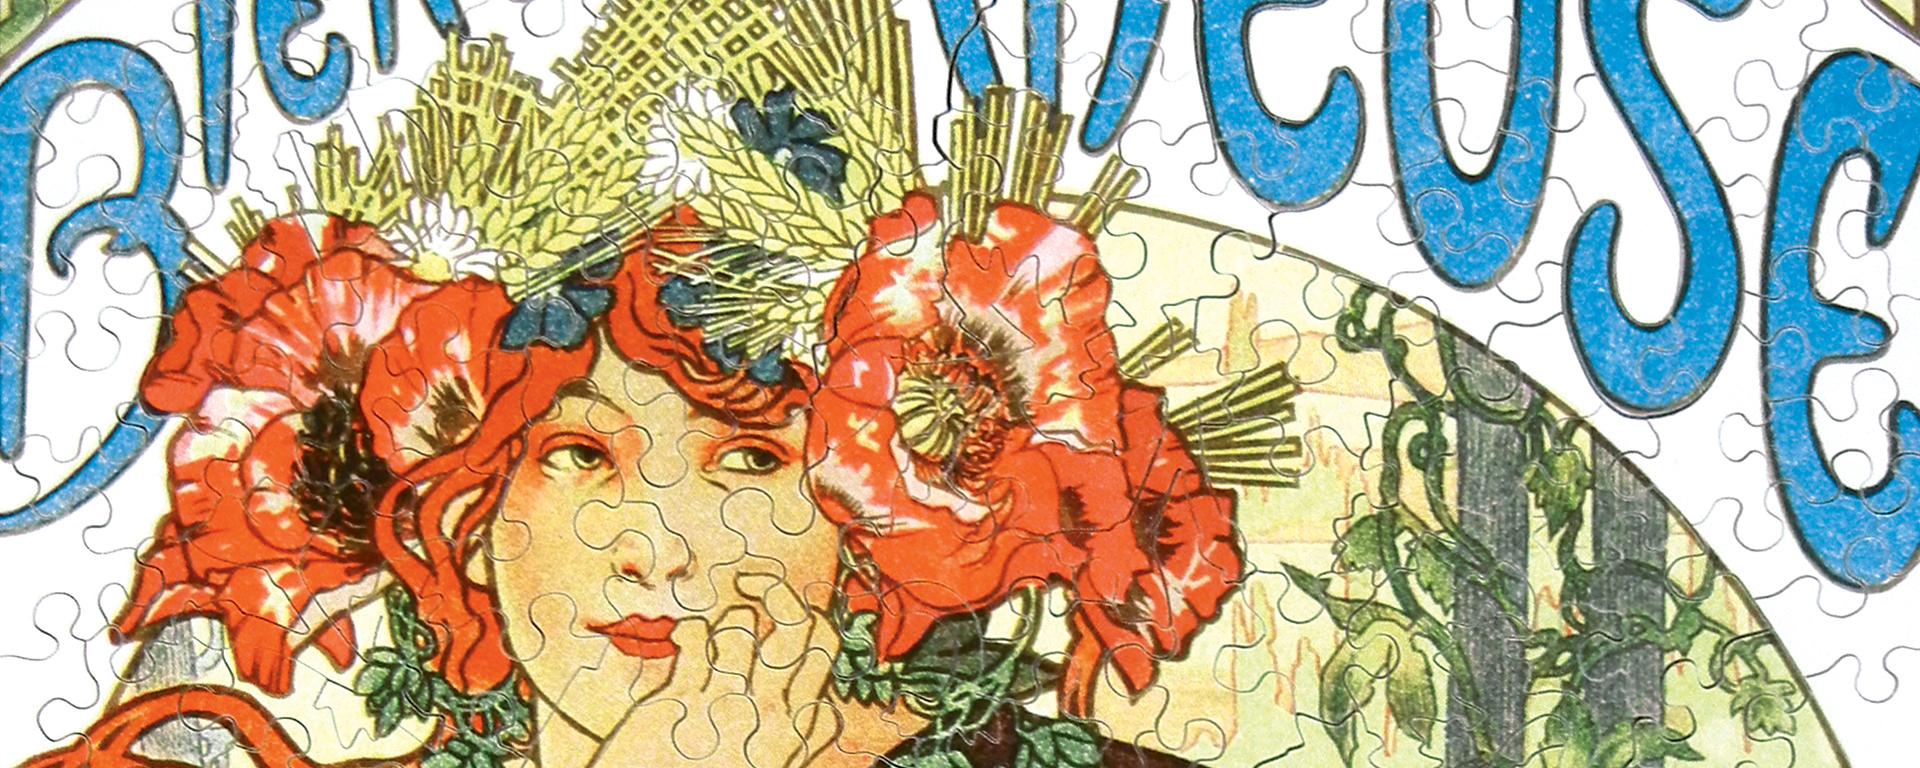 Wooden vintage poster puzzle featuring Bieres de la Meuse by Alphonse Mucha from 1897. A woman staring off into the distance wearing a flower crown of large red flowers, wheat, and daisies.